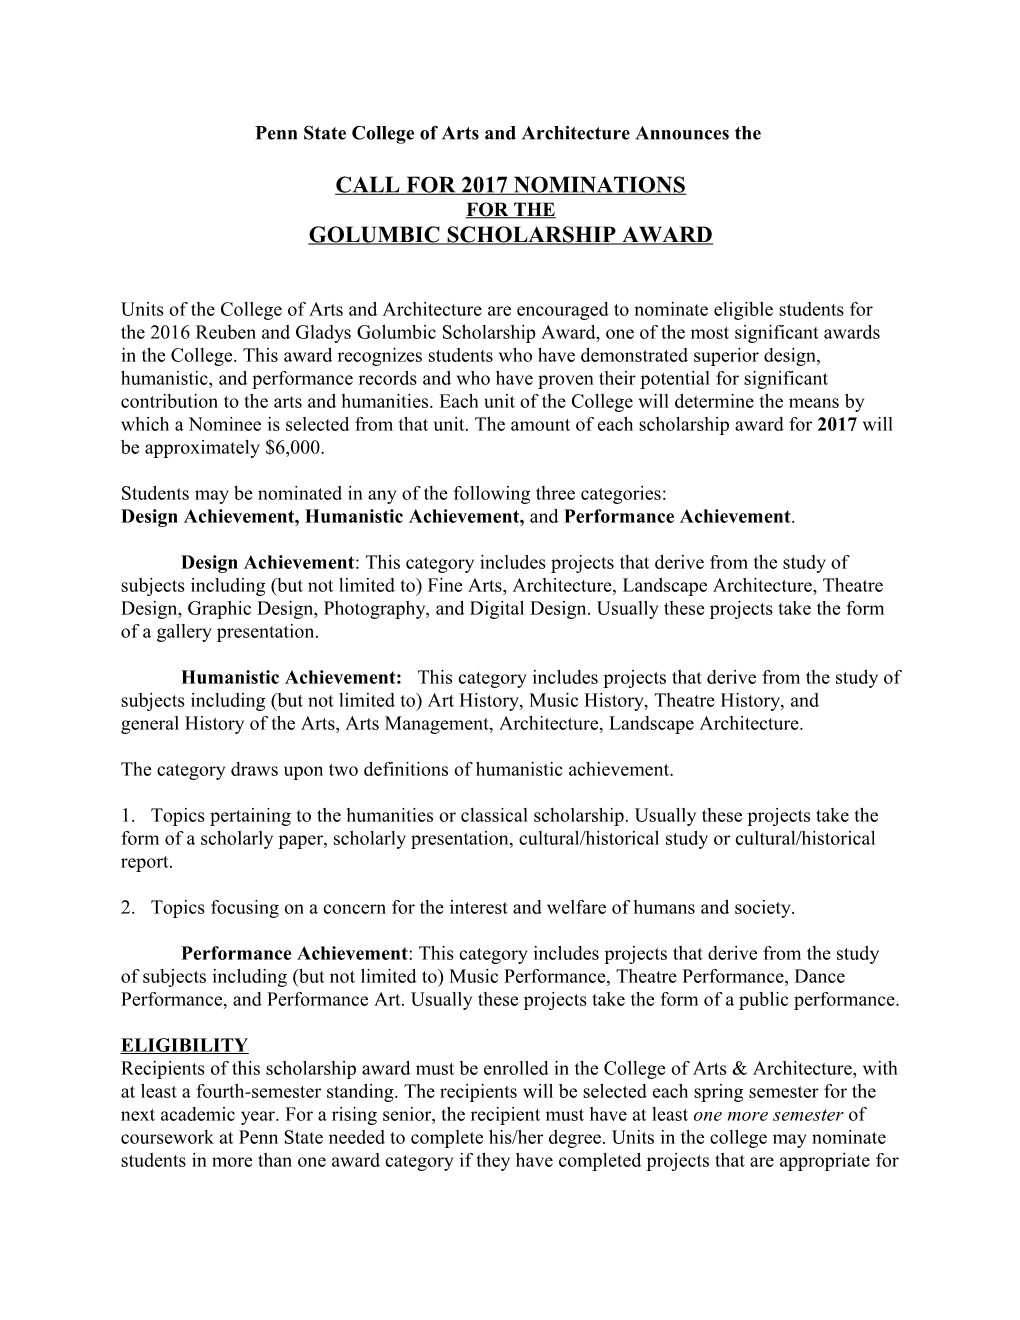 Call for 2010 Nominations for the Golumbic Scholarship Award